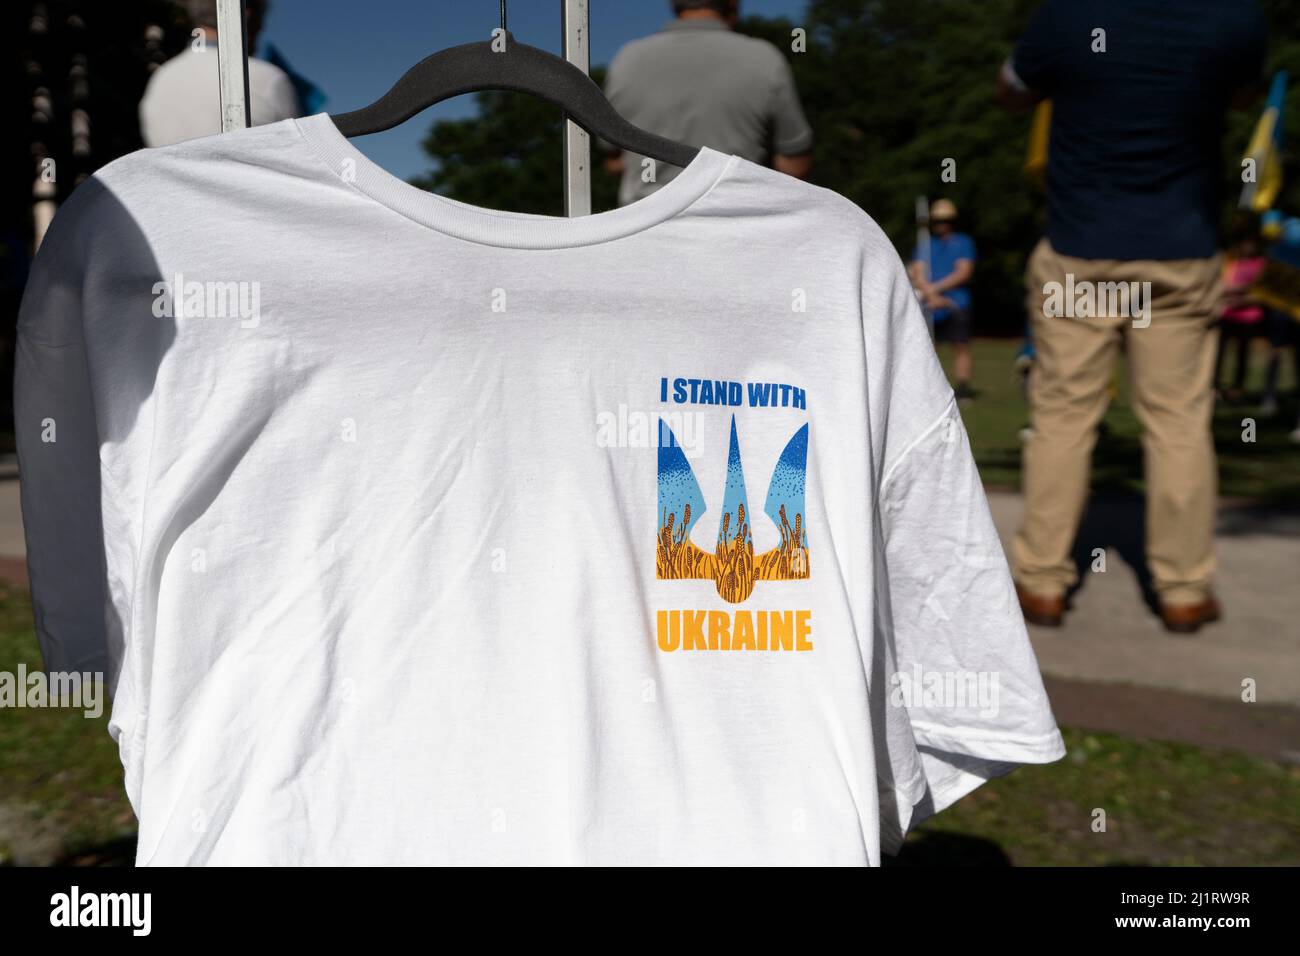 Orlando, USA. 24th Mar, 2022. A pro Ukrainian t-shirt seen during a rally in Lake Eola Park in Orlando, Florida on March 27, 2022. The rally held to condemn President Vladimir Putin and Russia's invasion of Ukraine. Ukrainian President Volodymyr Zelensky called Ukrainians to fight back against the Russian invaders. (Photo by Ronen Tivony/Sipa USA) *** Please Use Credit from Credit Field *** Credit: Sipa USA/Alamy Live News Stock Photo